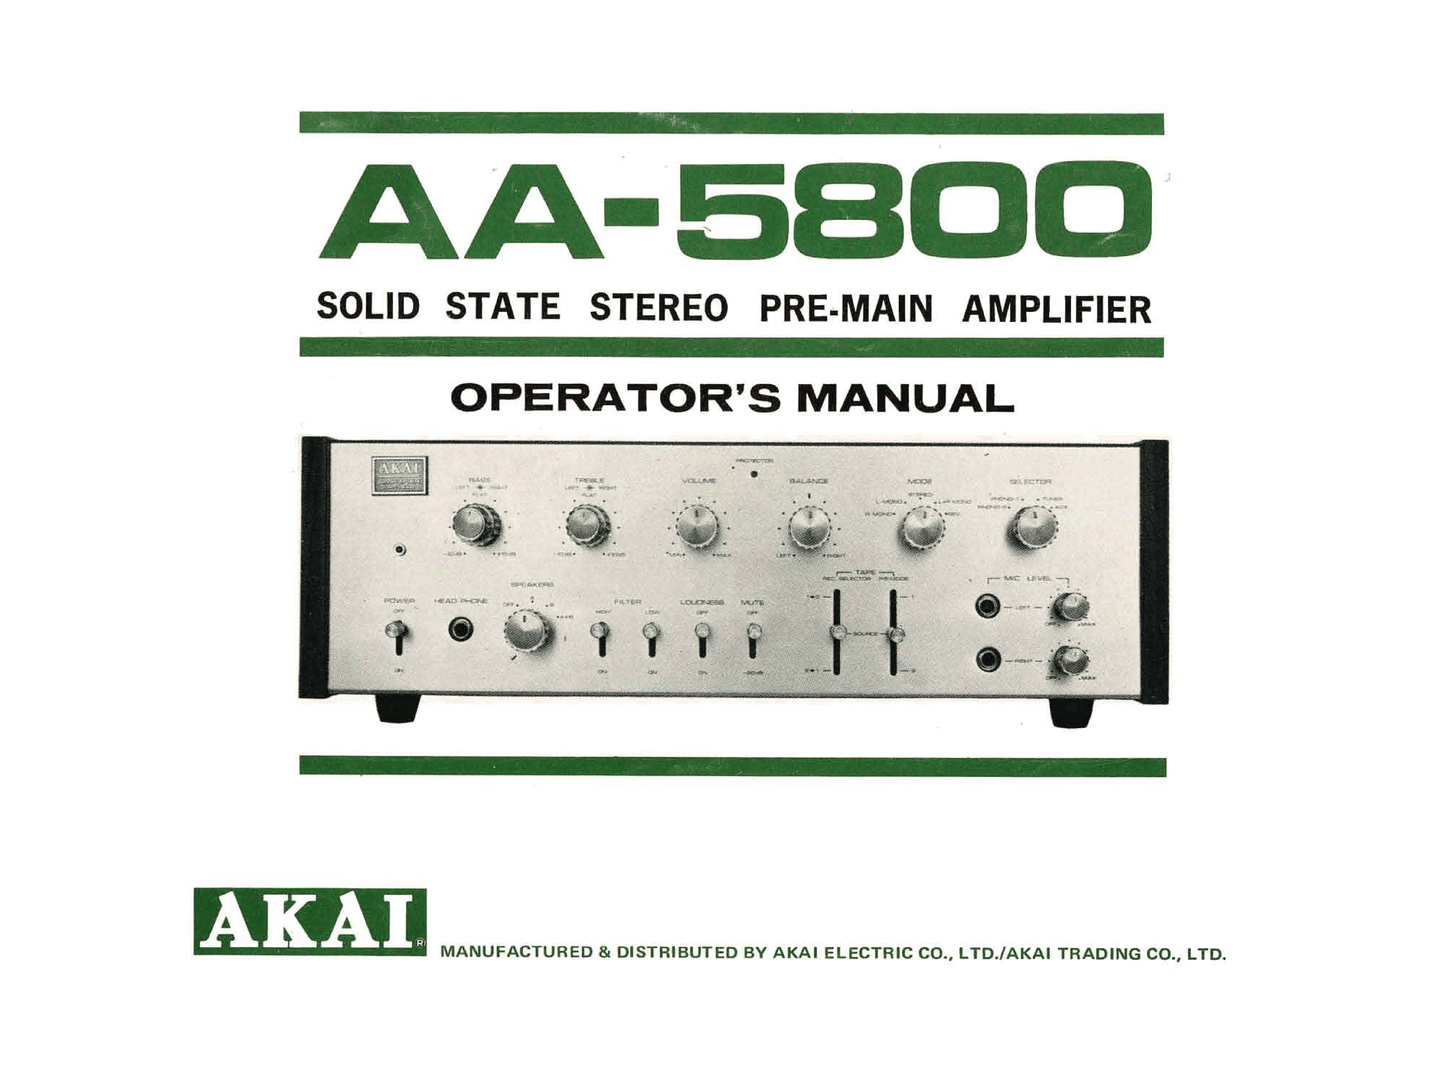 Akai AA-5200, AA-5500 & AA-5800 Stereo Receiver Owner & Service Manual (Pages: 43)